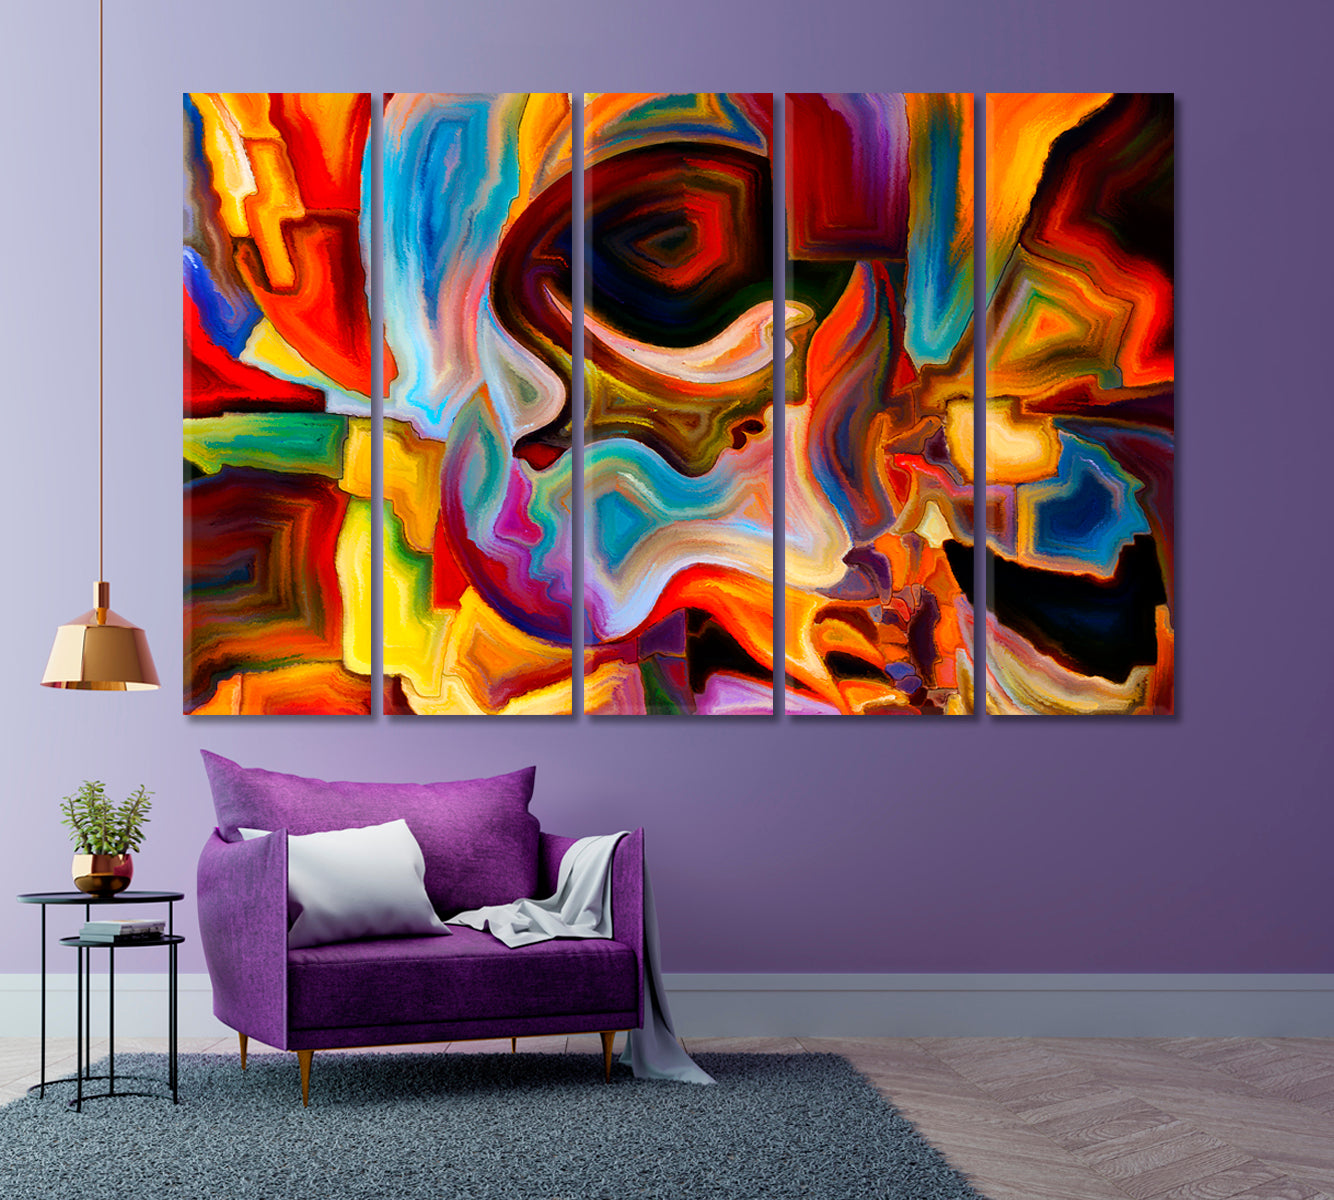 Mind Colors Abstract Art Print Artesty 5 panels 36" x 24" 